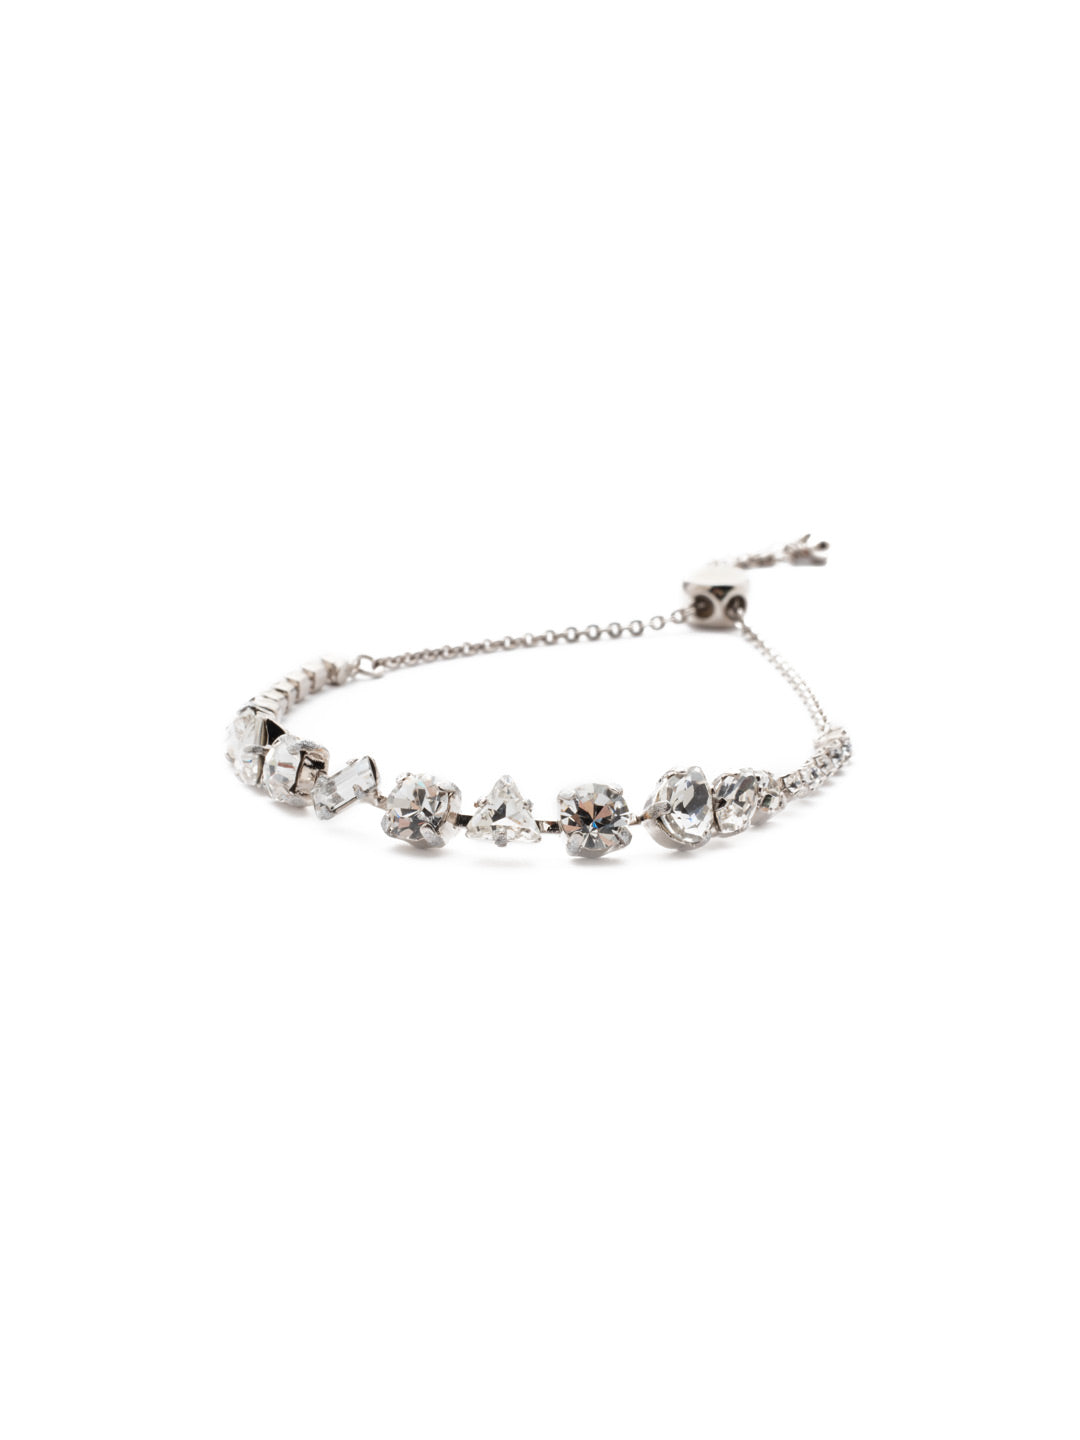 Cherished Slider Bracelet - BEK19RHCRY - <p>One shape doesn't have to fit all. Go for versatility with crystals of all kinds in a slider you can match to any outfit. Slider bracelet closure. From Sorrelli's Crystal collection in our Palladium Silver-tone finish.</p>